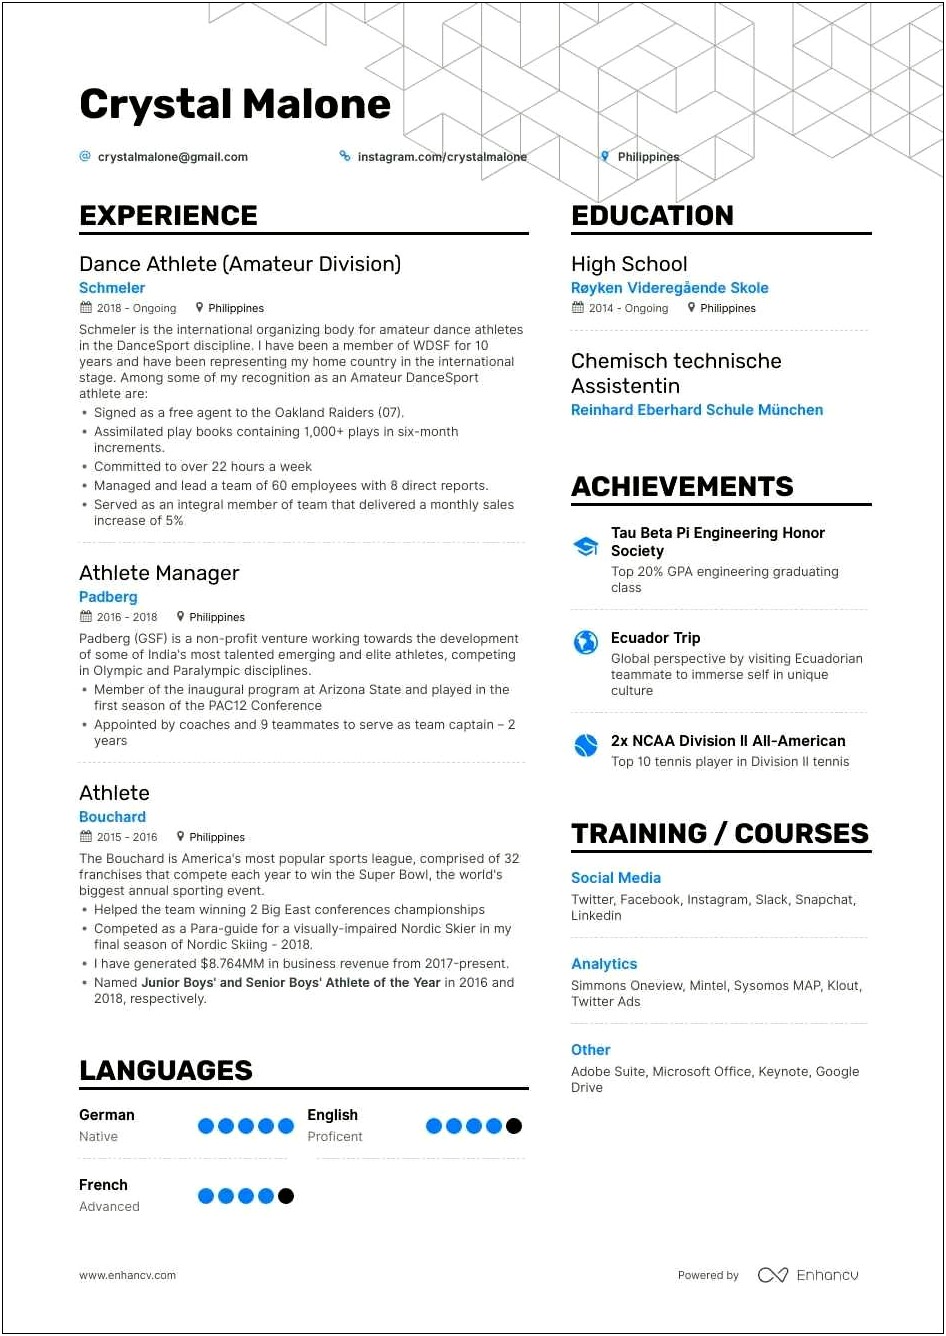 Resume Samples For Student Athletes